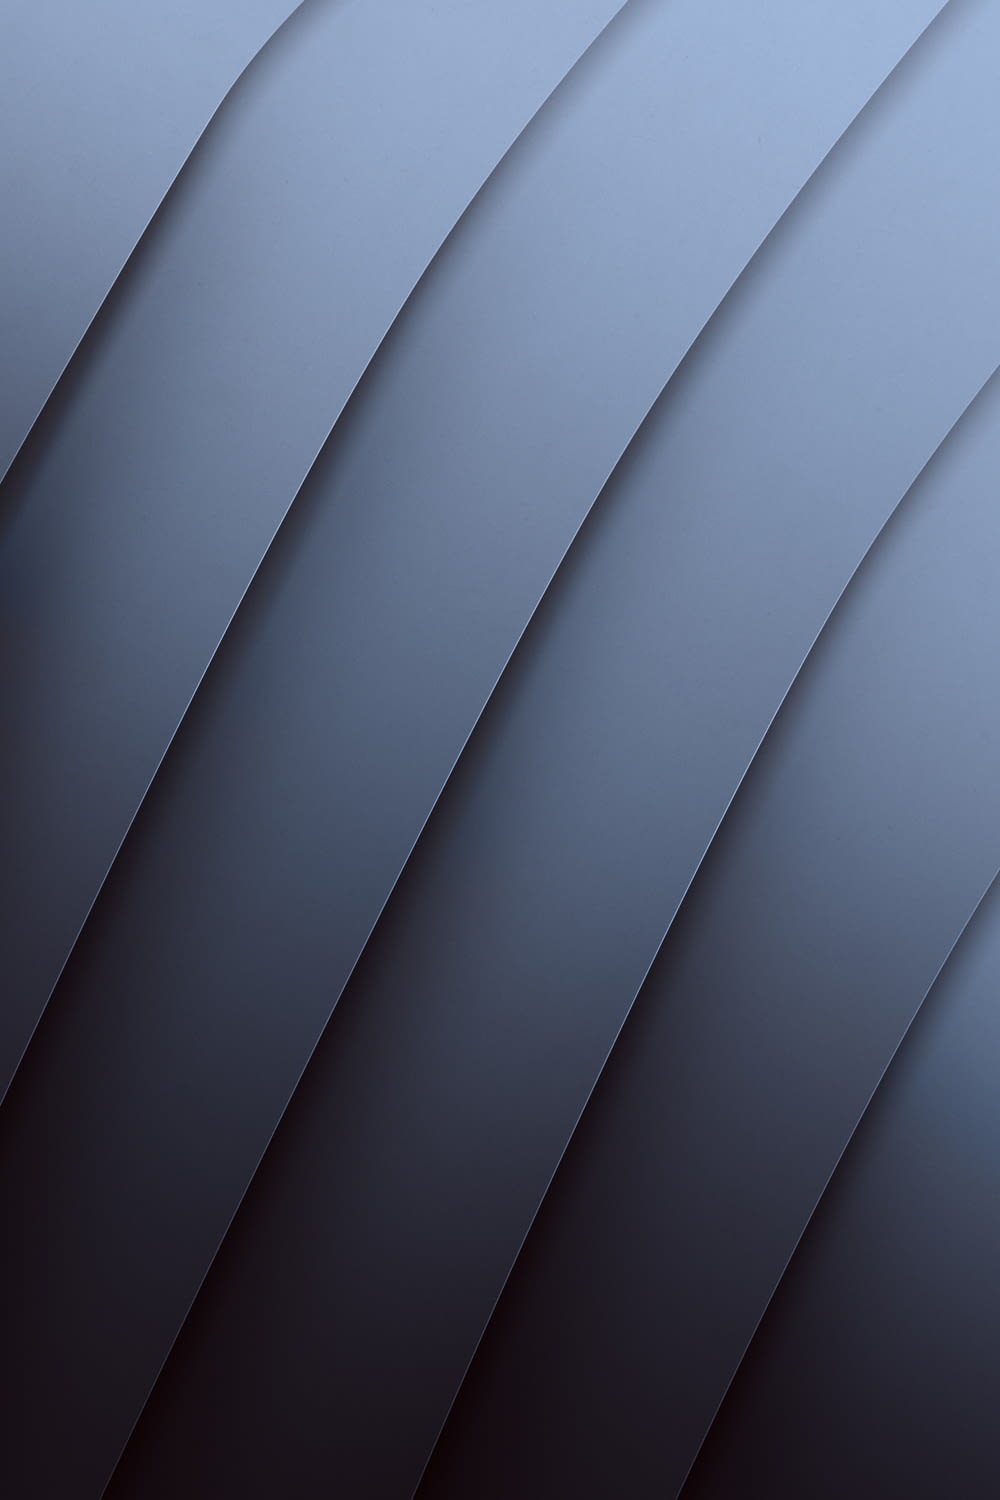 a dark blue background with wavy lines